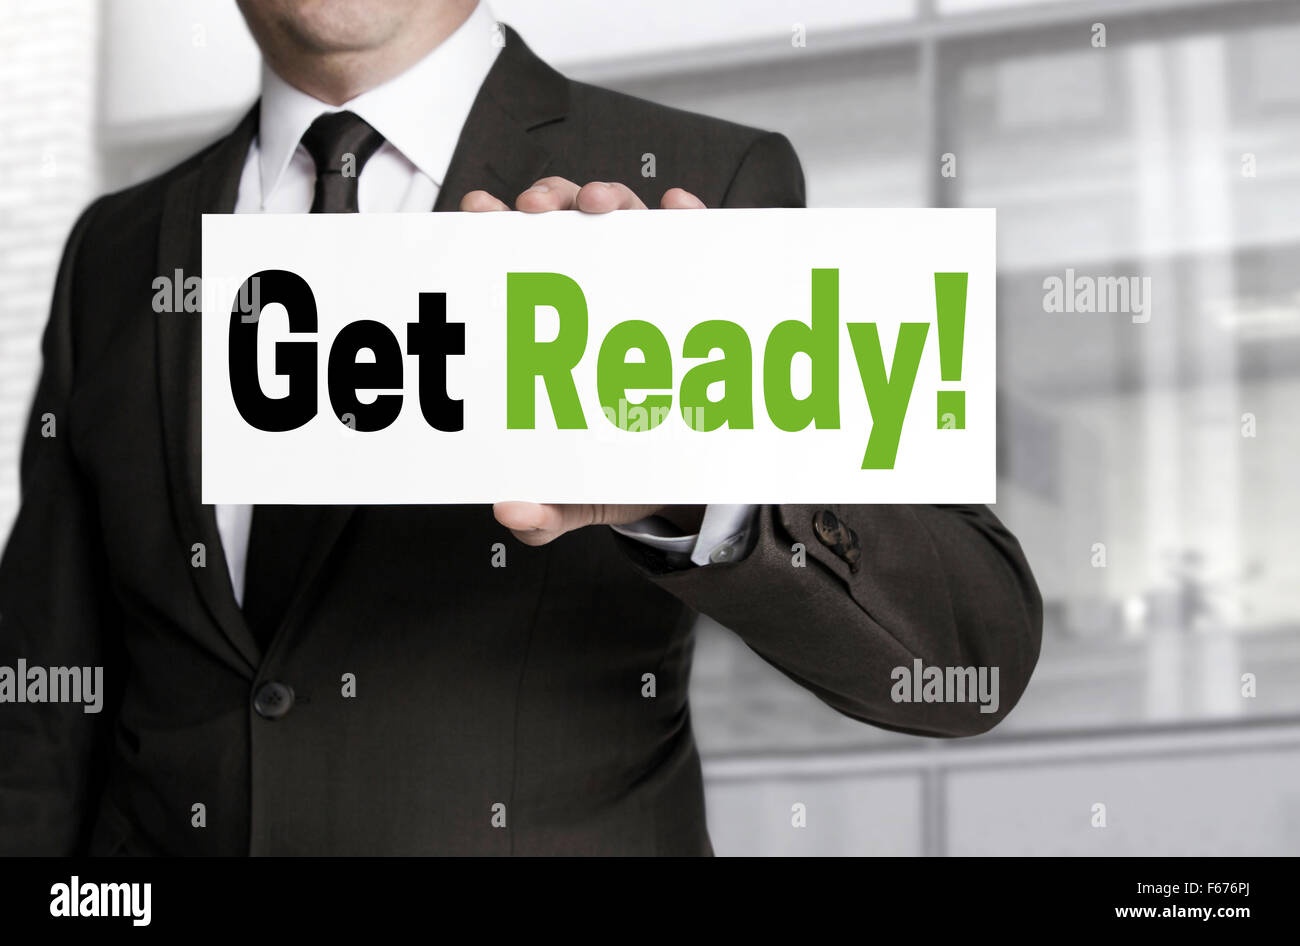 Get ready sign is held by businessman concept. Stock Photo